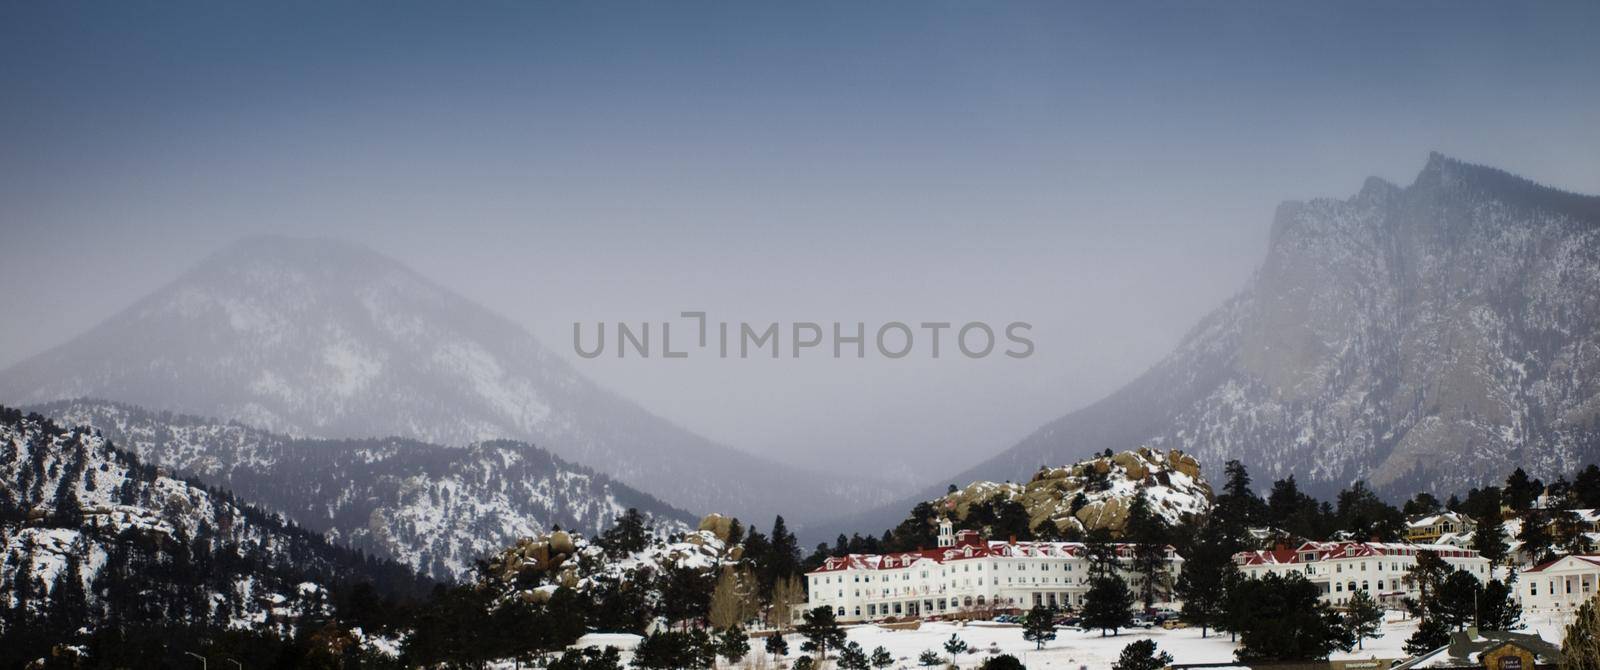 The Stanley Hotel by arinahabich